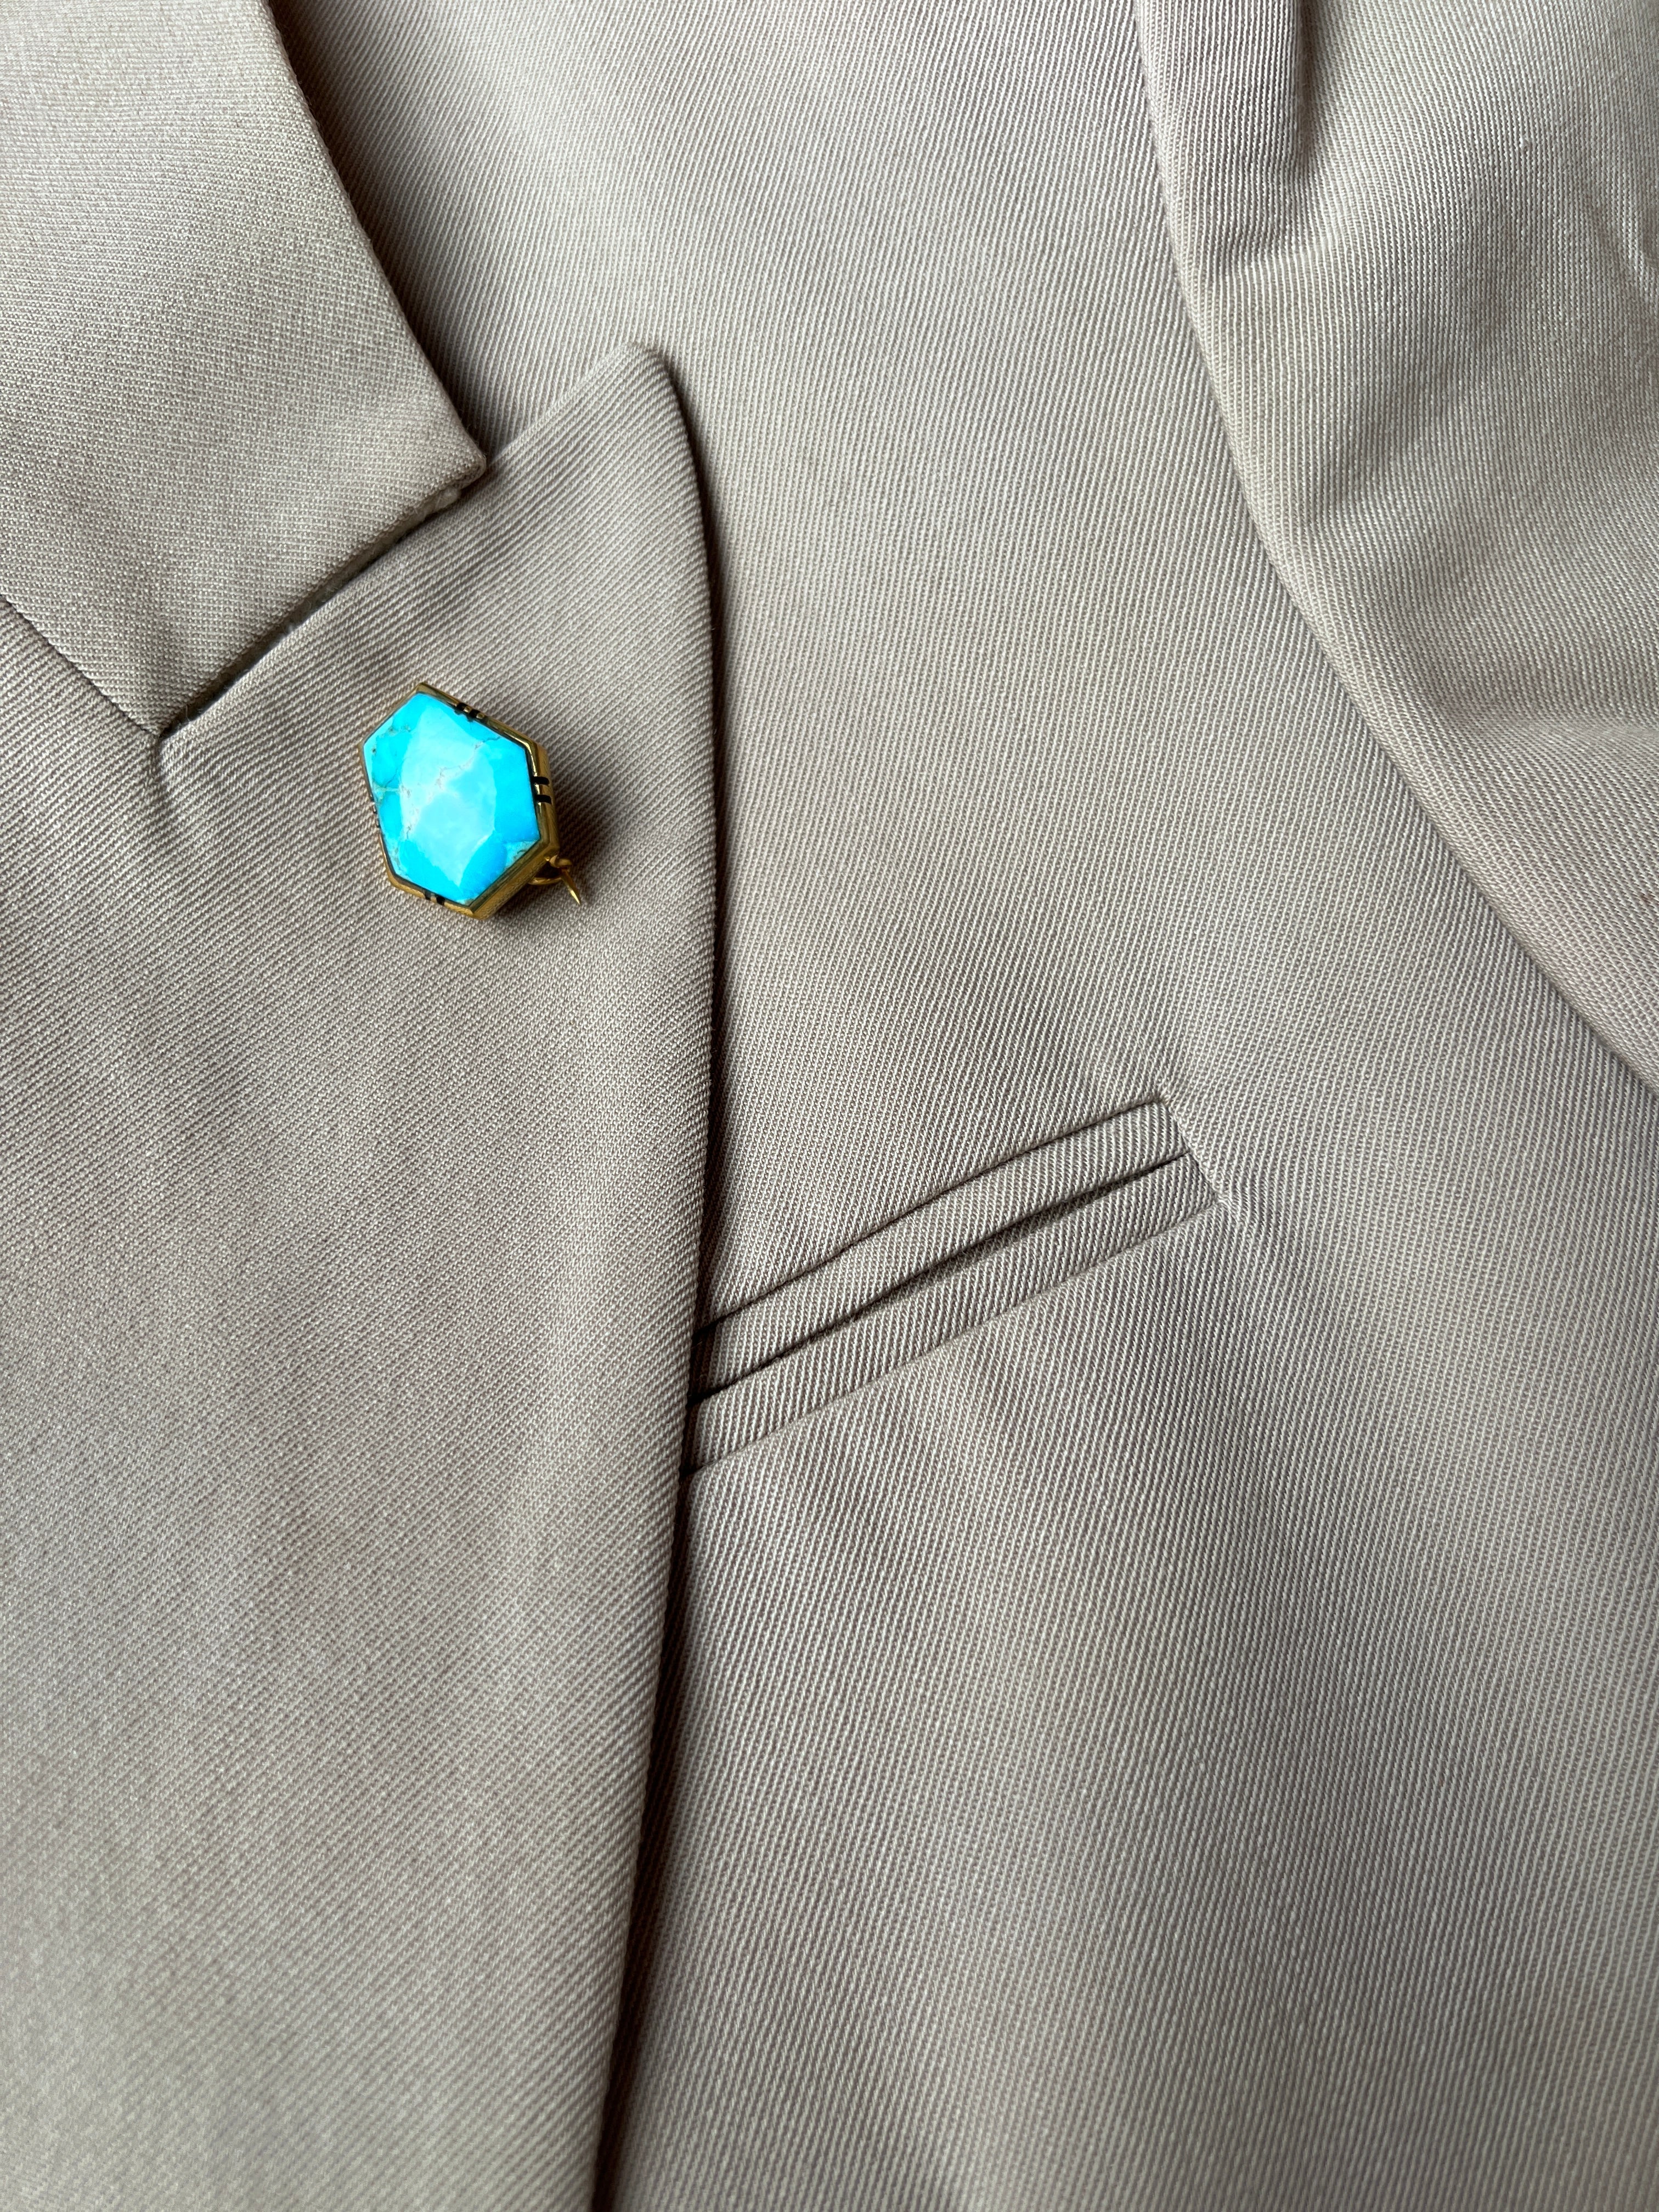 Future Nomads Brooches Turquoise Brooch